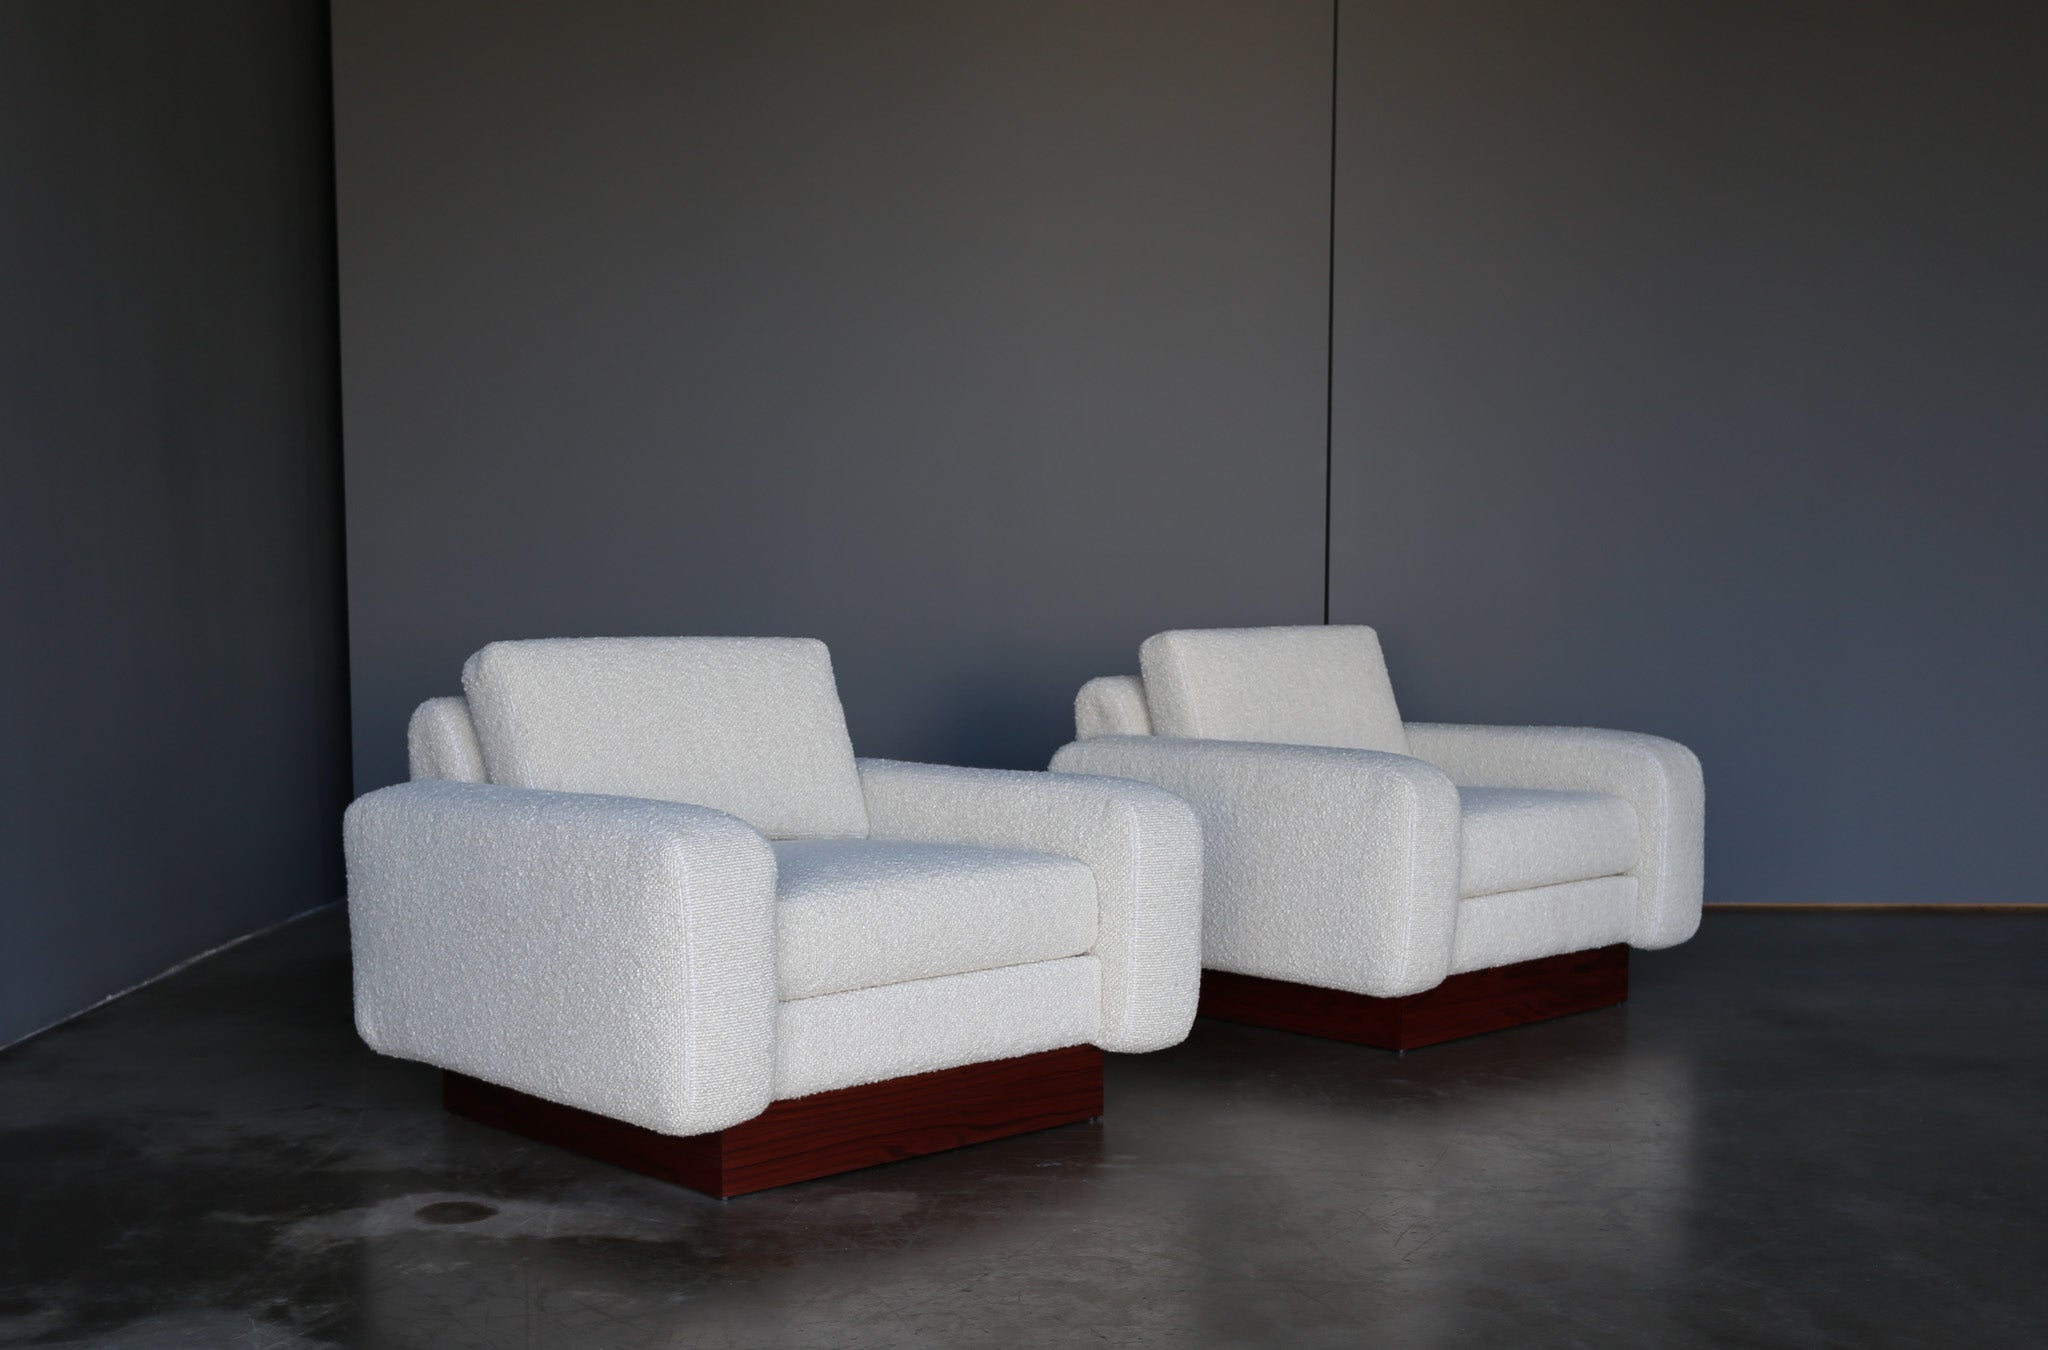 = SOLD = Nicos Zographos Pair of Lounge Chairs for Zographos Designs Ltd., USA, 1980's